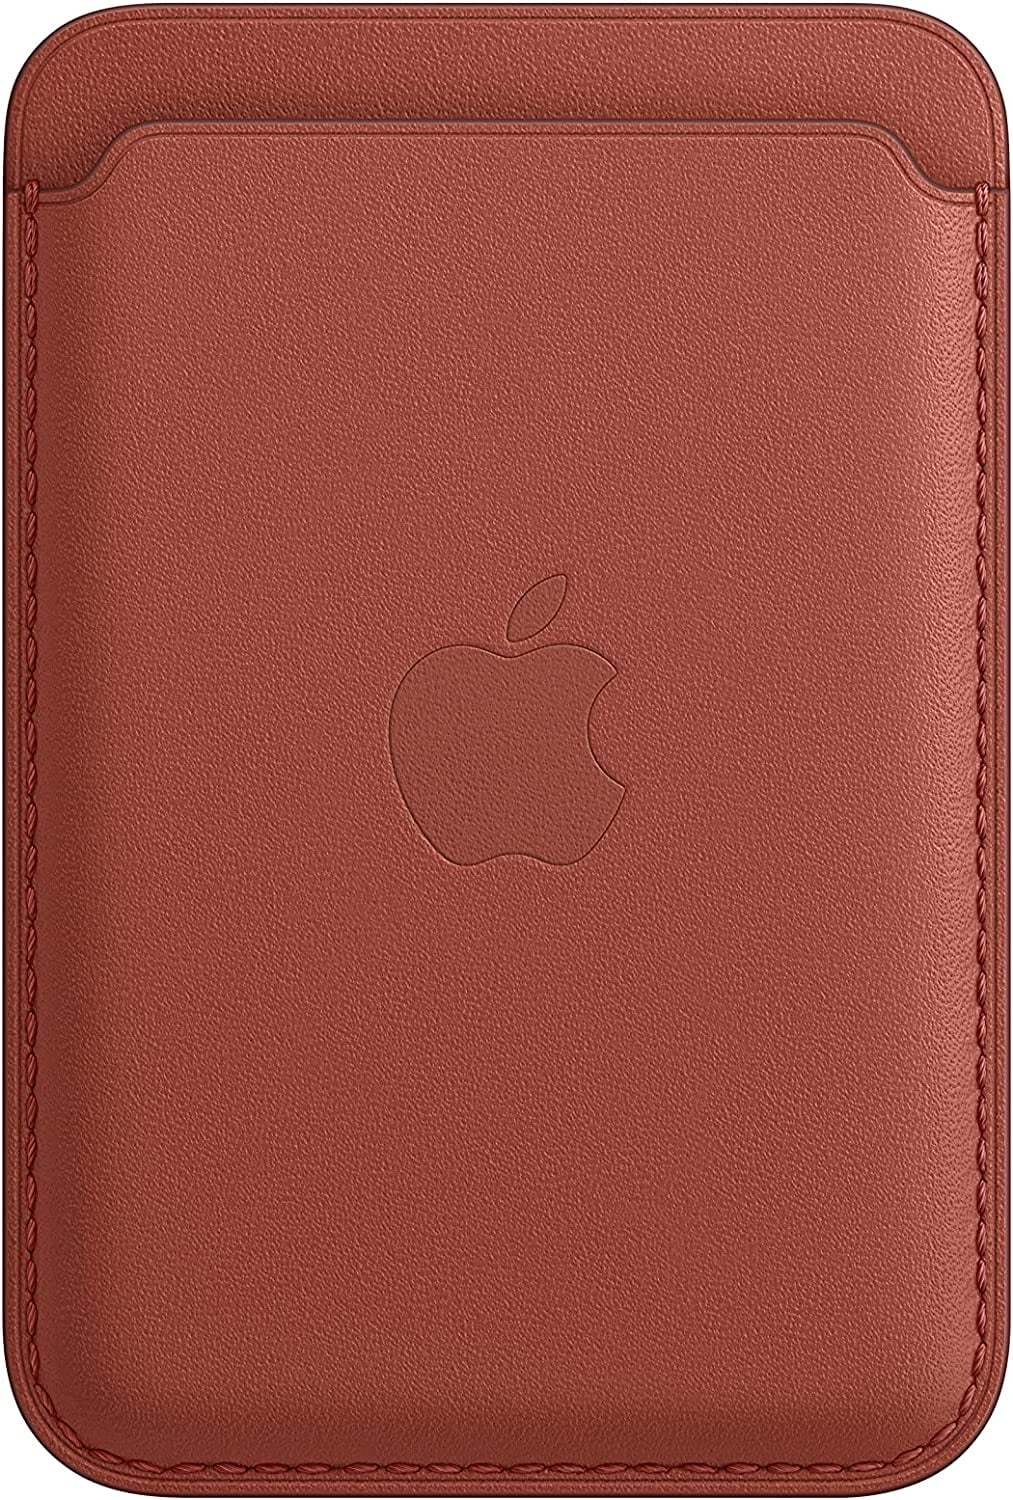 iPhone Leather Wallet with MagSafe - Saddle Brown 